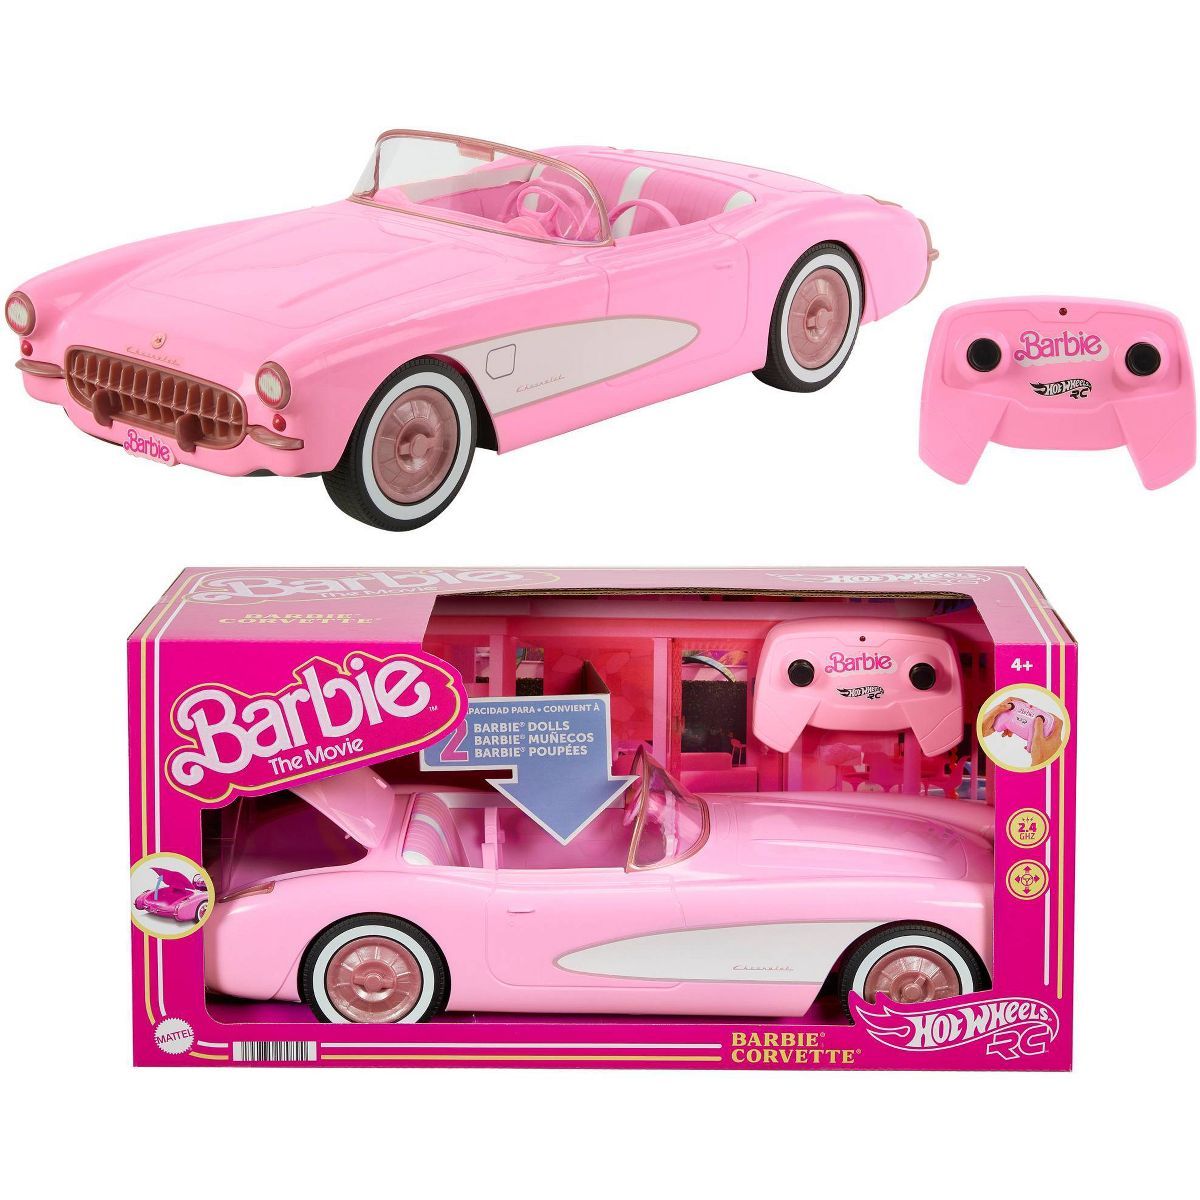 Hot Wheels RC Barbie Corvette Remote Control Car from Barbie: The Movie | Target